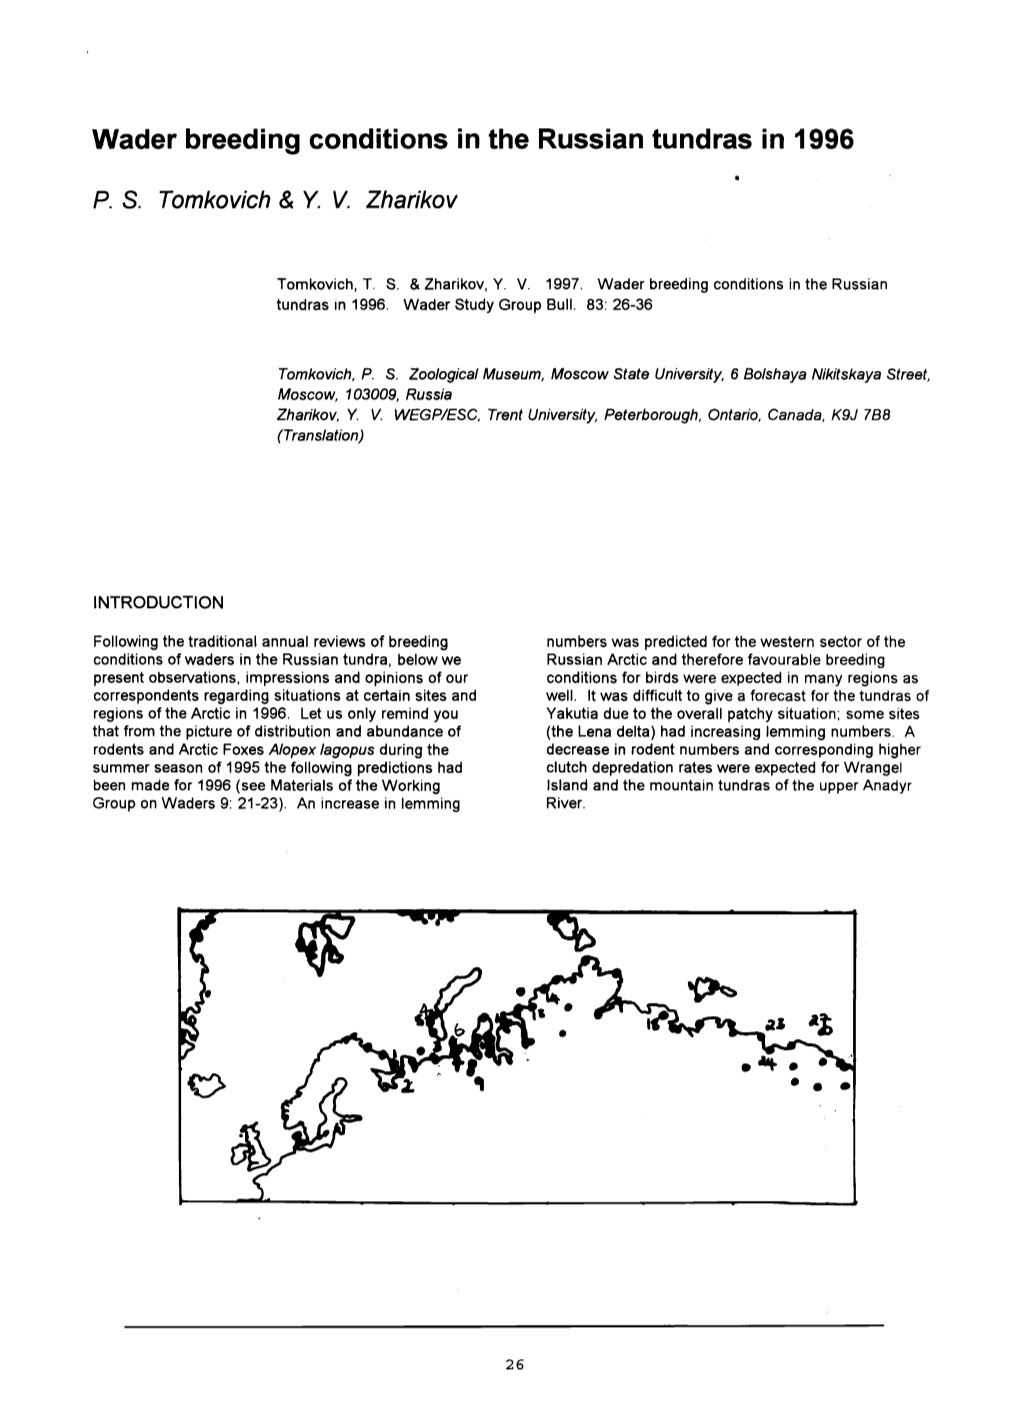 Wader Breeding Conditions in the Russian Tundras in 1996